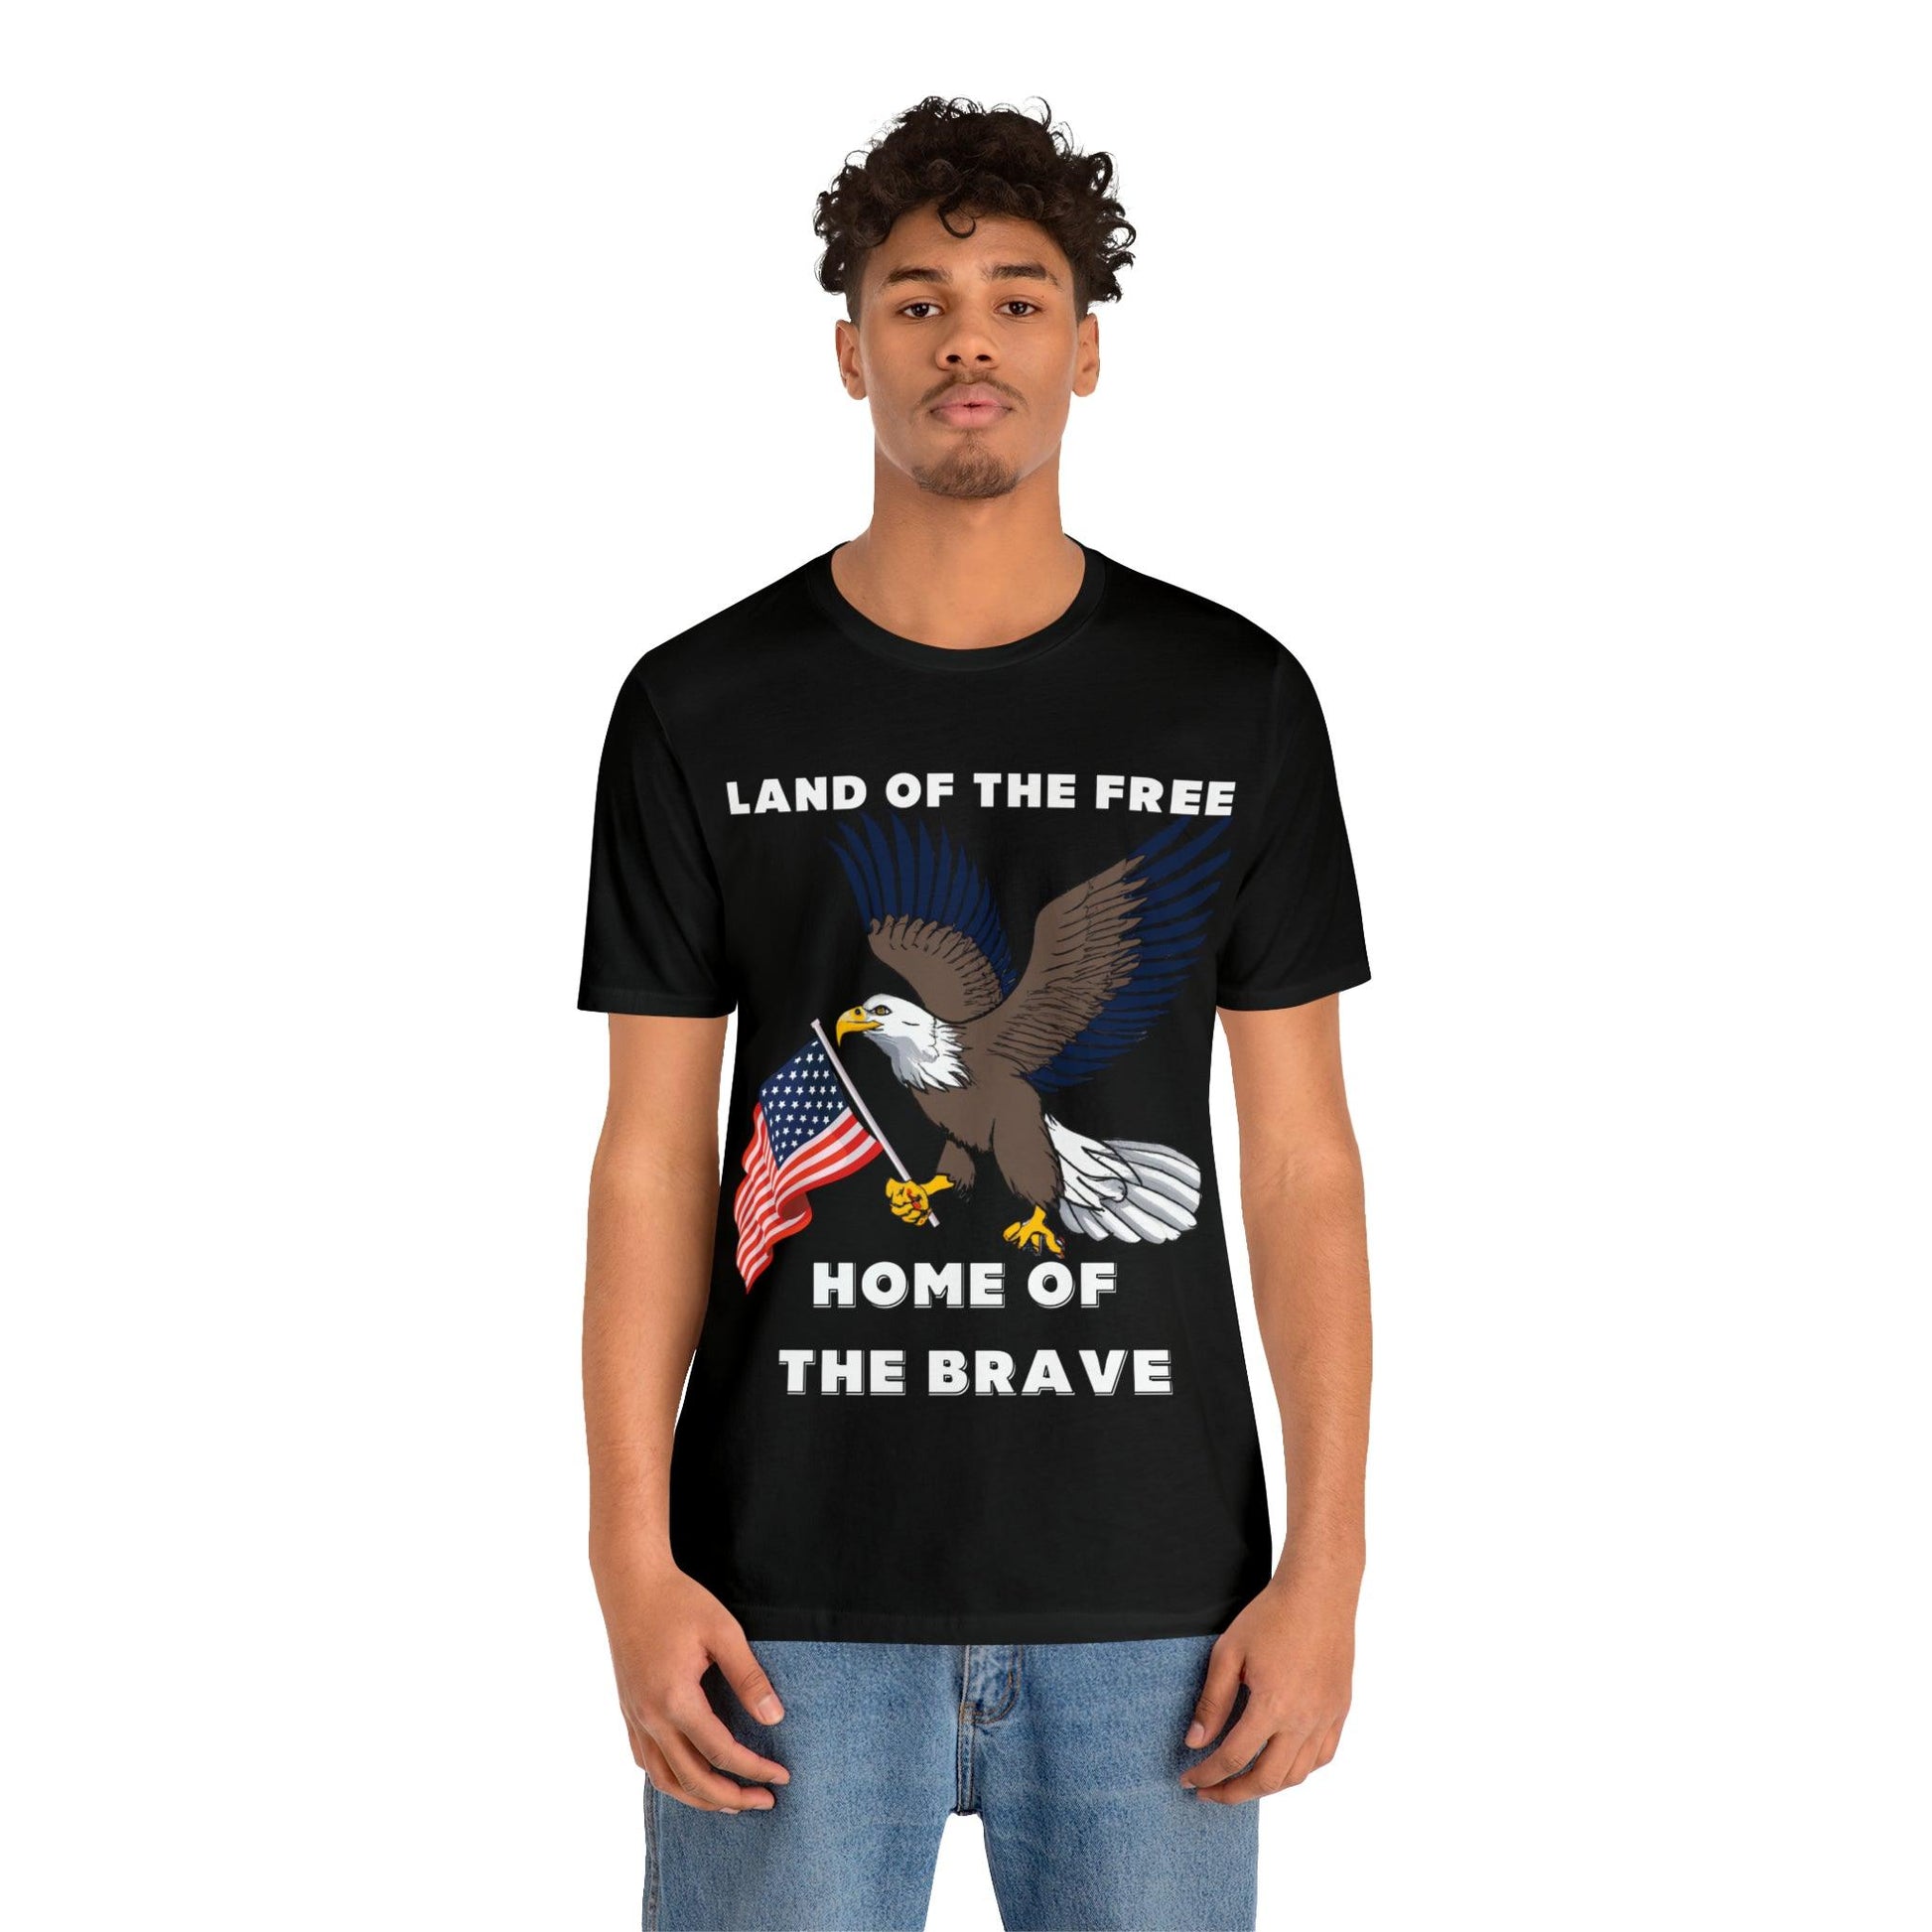 Celebrate Independence Day with Patriotic Shirts: Land of the free, Home of the Brave Shirt for Women and Men - Giftsmojo